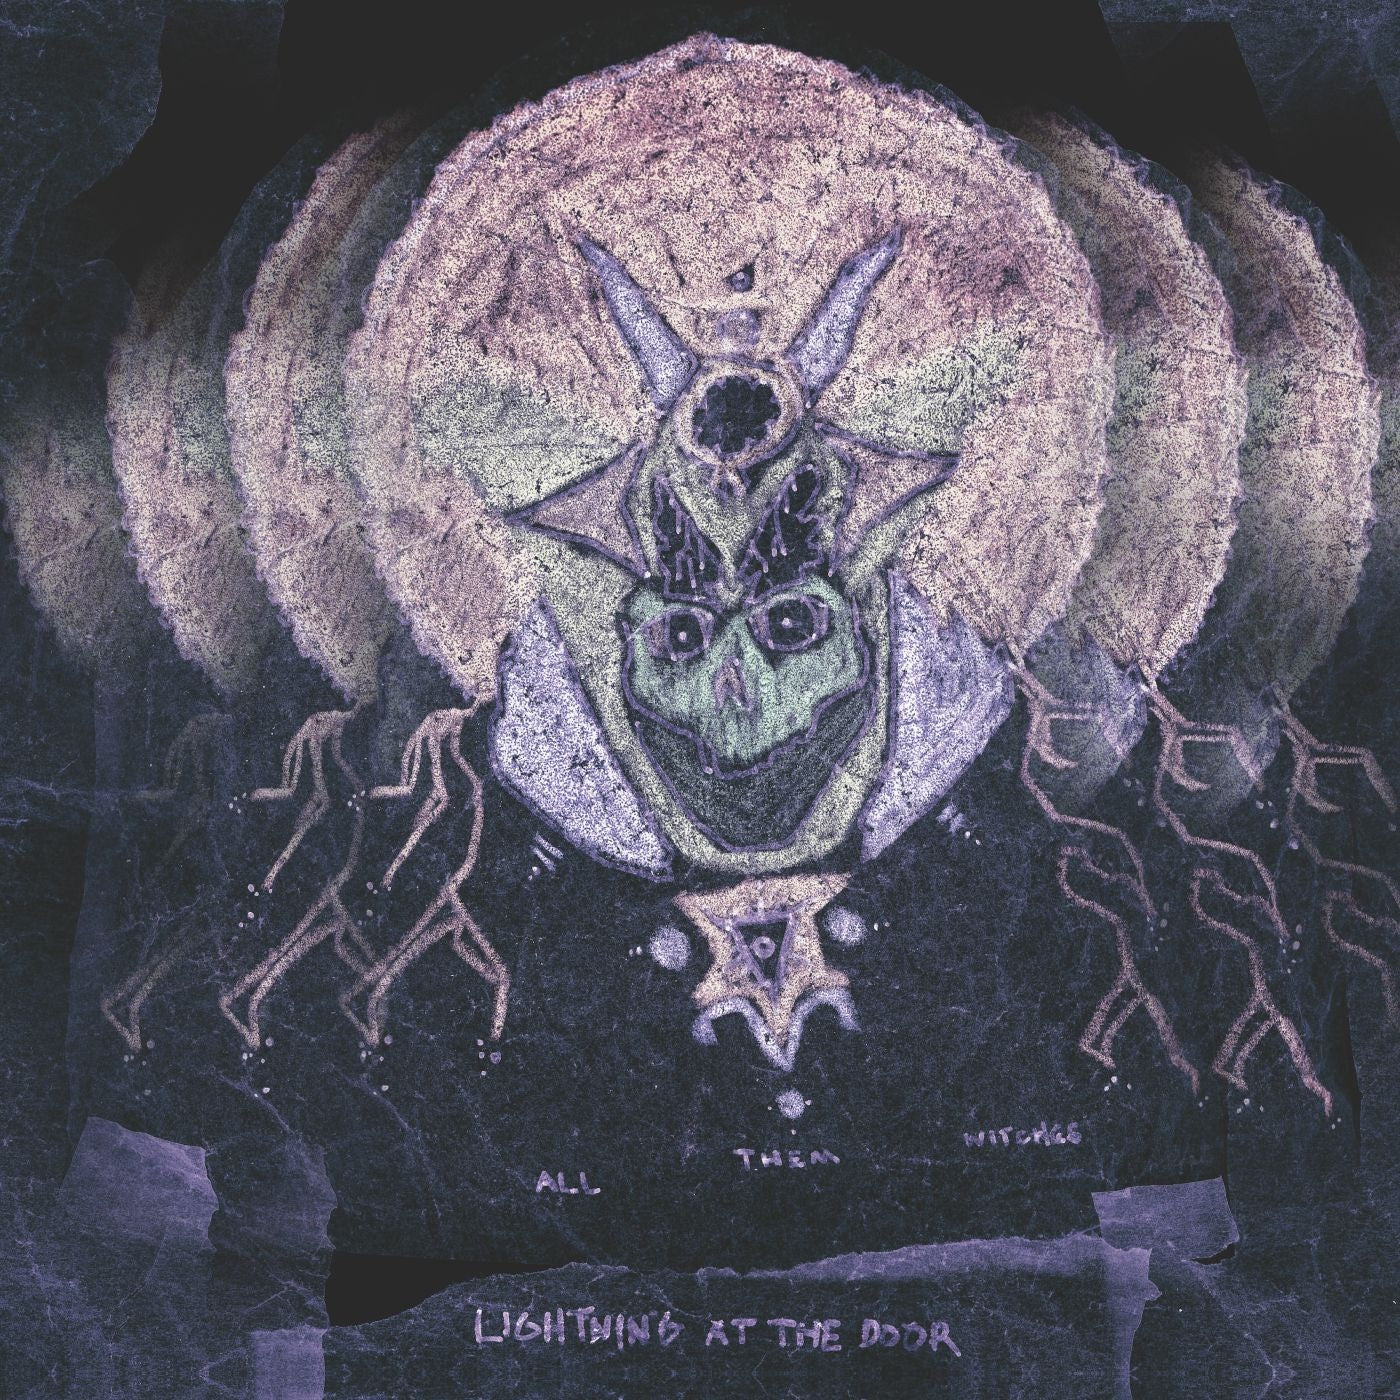 All Them Witches - Lightning at the Door (2013) - New LP Record 2023 New West Vinyl & Download - Stoner Rock / Psychedelic Rock